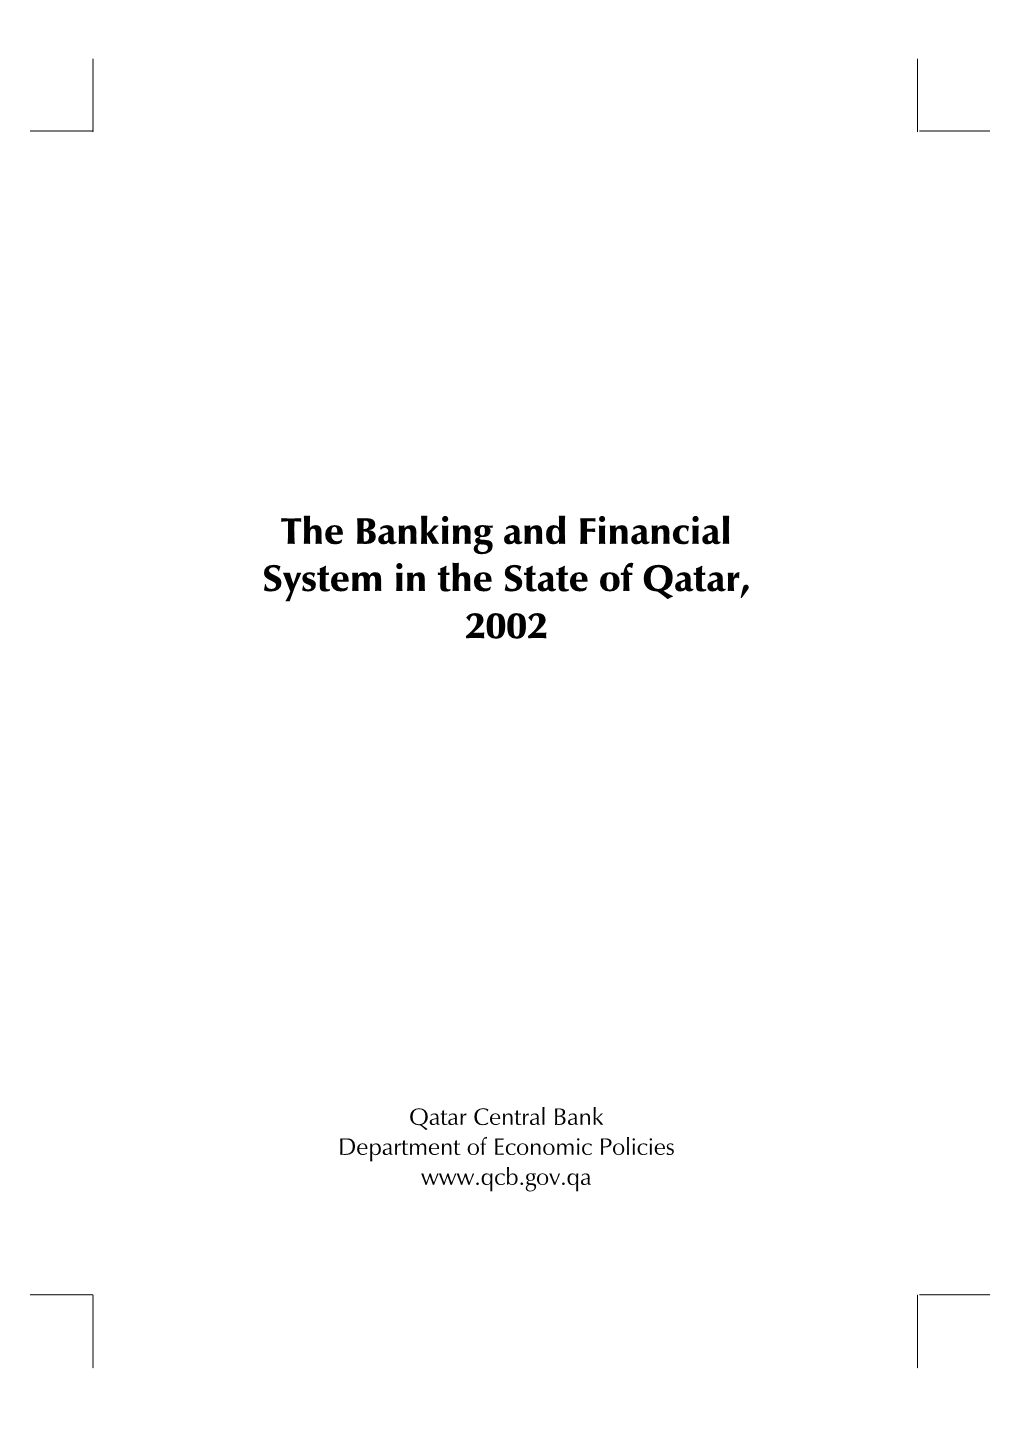 The Banking and Financial System in the State of Qatar, 2002